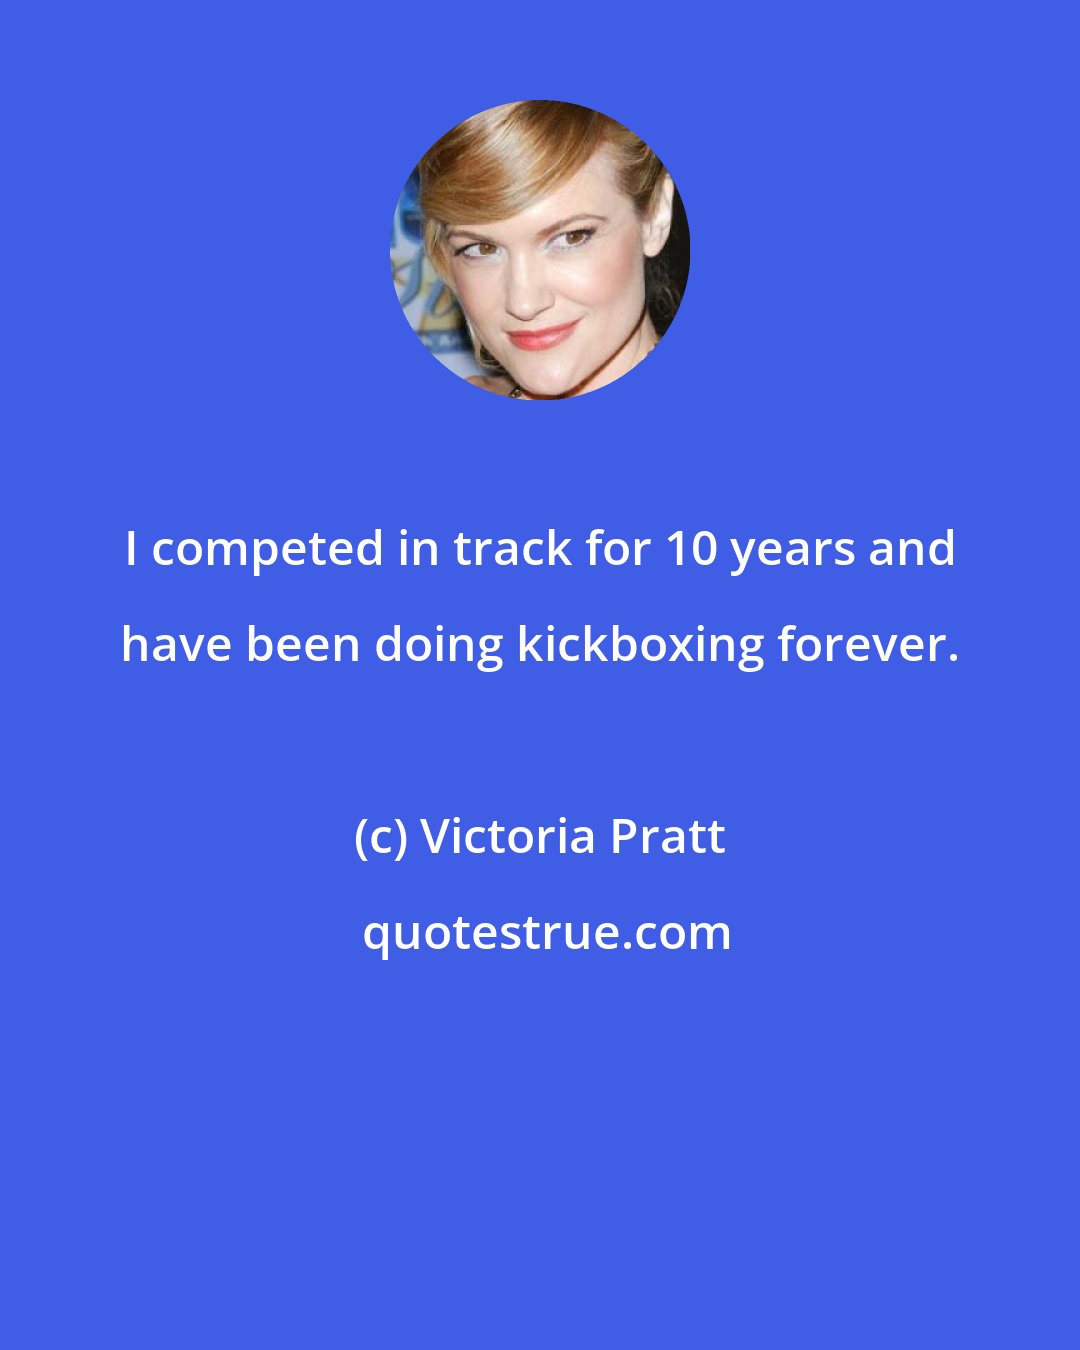 Victoria Pratt: I competed in track for 10 years and have been doing kickboxing forever.